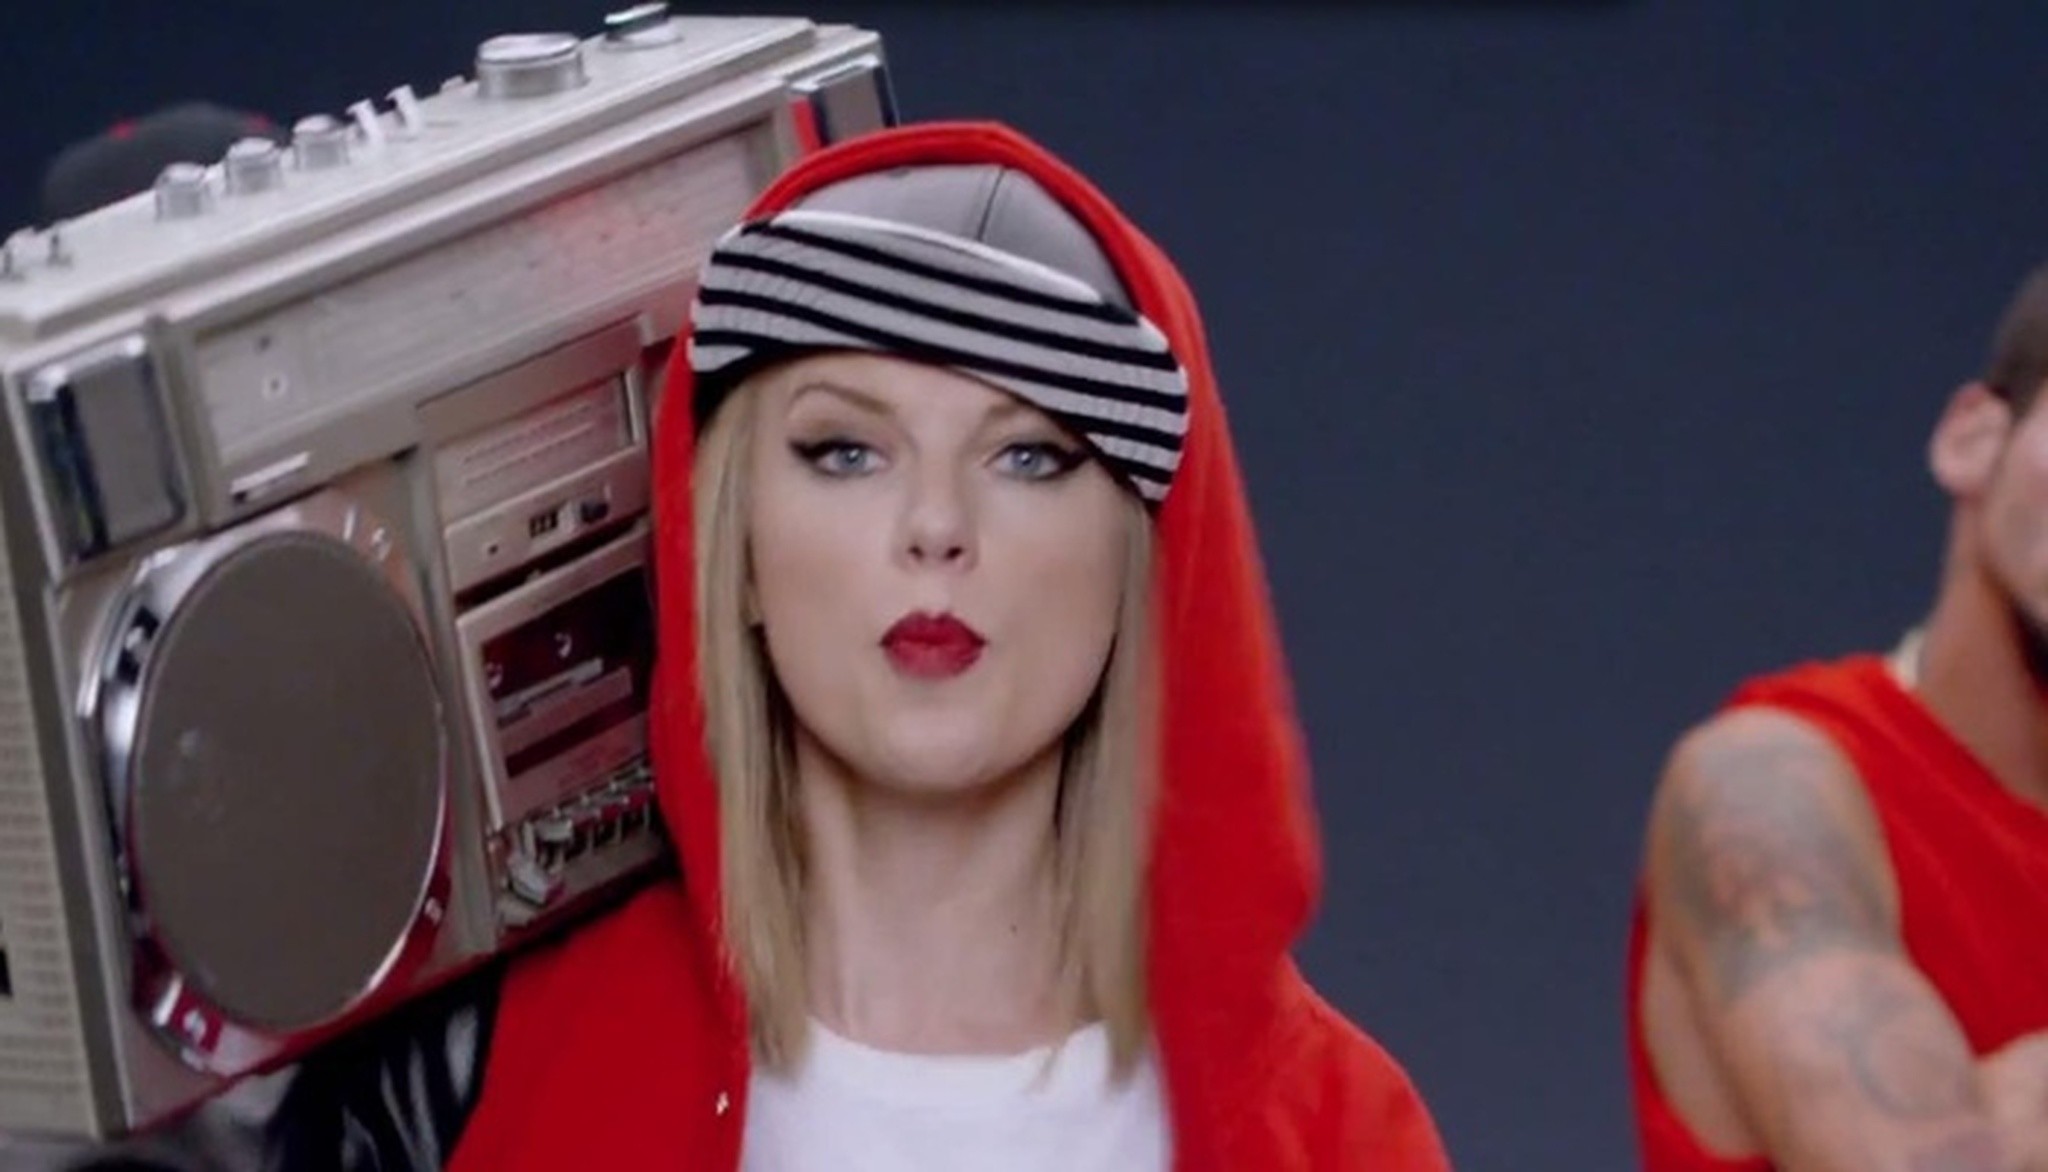 New Taylor Swift video blasted for twerking and cultural appropriation